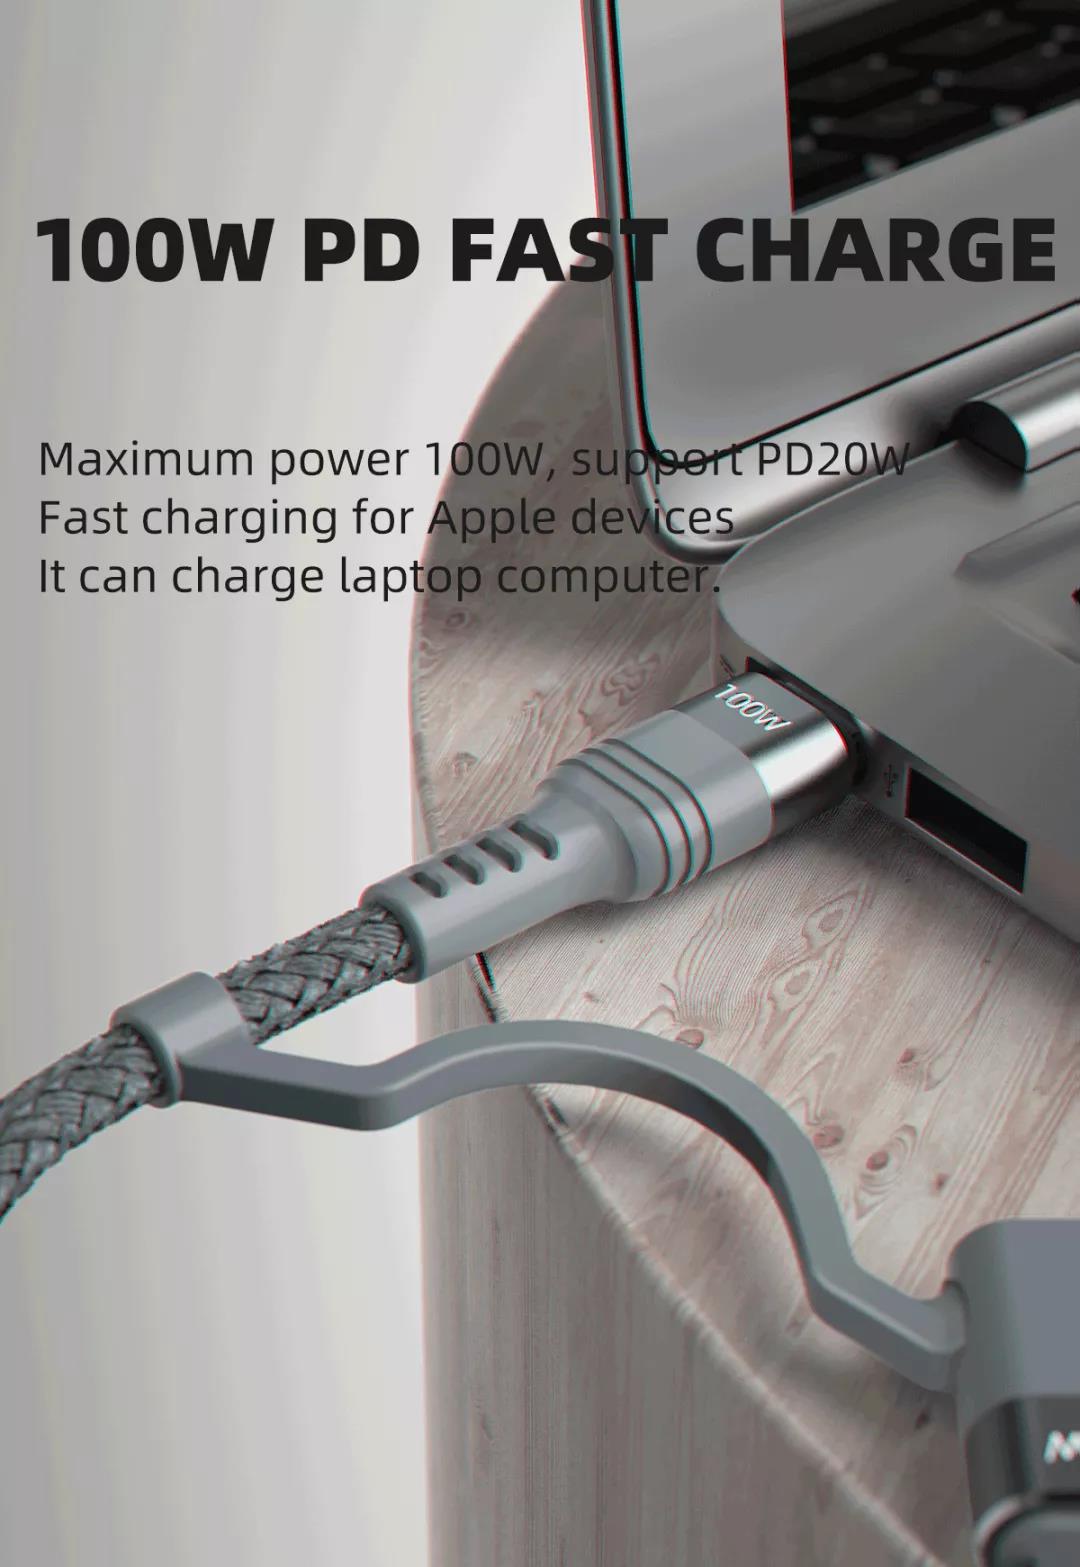 Dudao Upgrade Version 100W USB/Type-C to Lightning/Type-C 1M PD Multi Function Fast Charge Data Cable L20XS